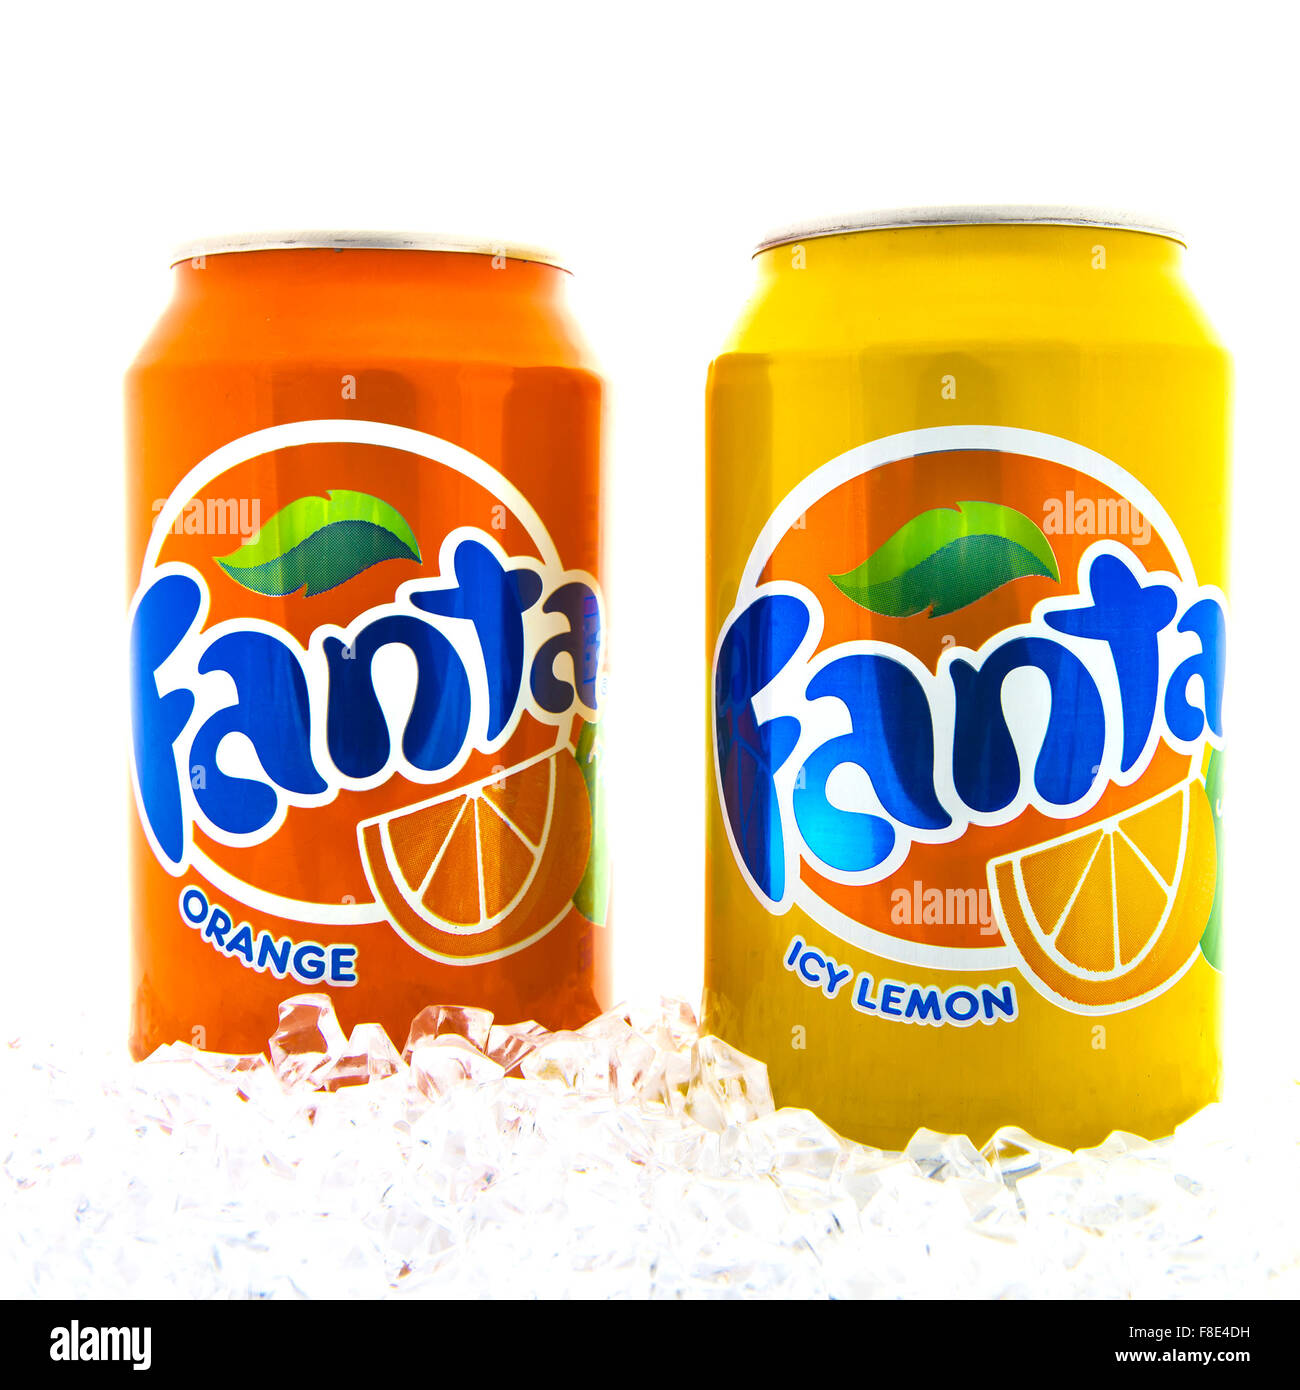 Two Cans of Fanta drink on ice over a white background Stock Photo